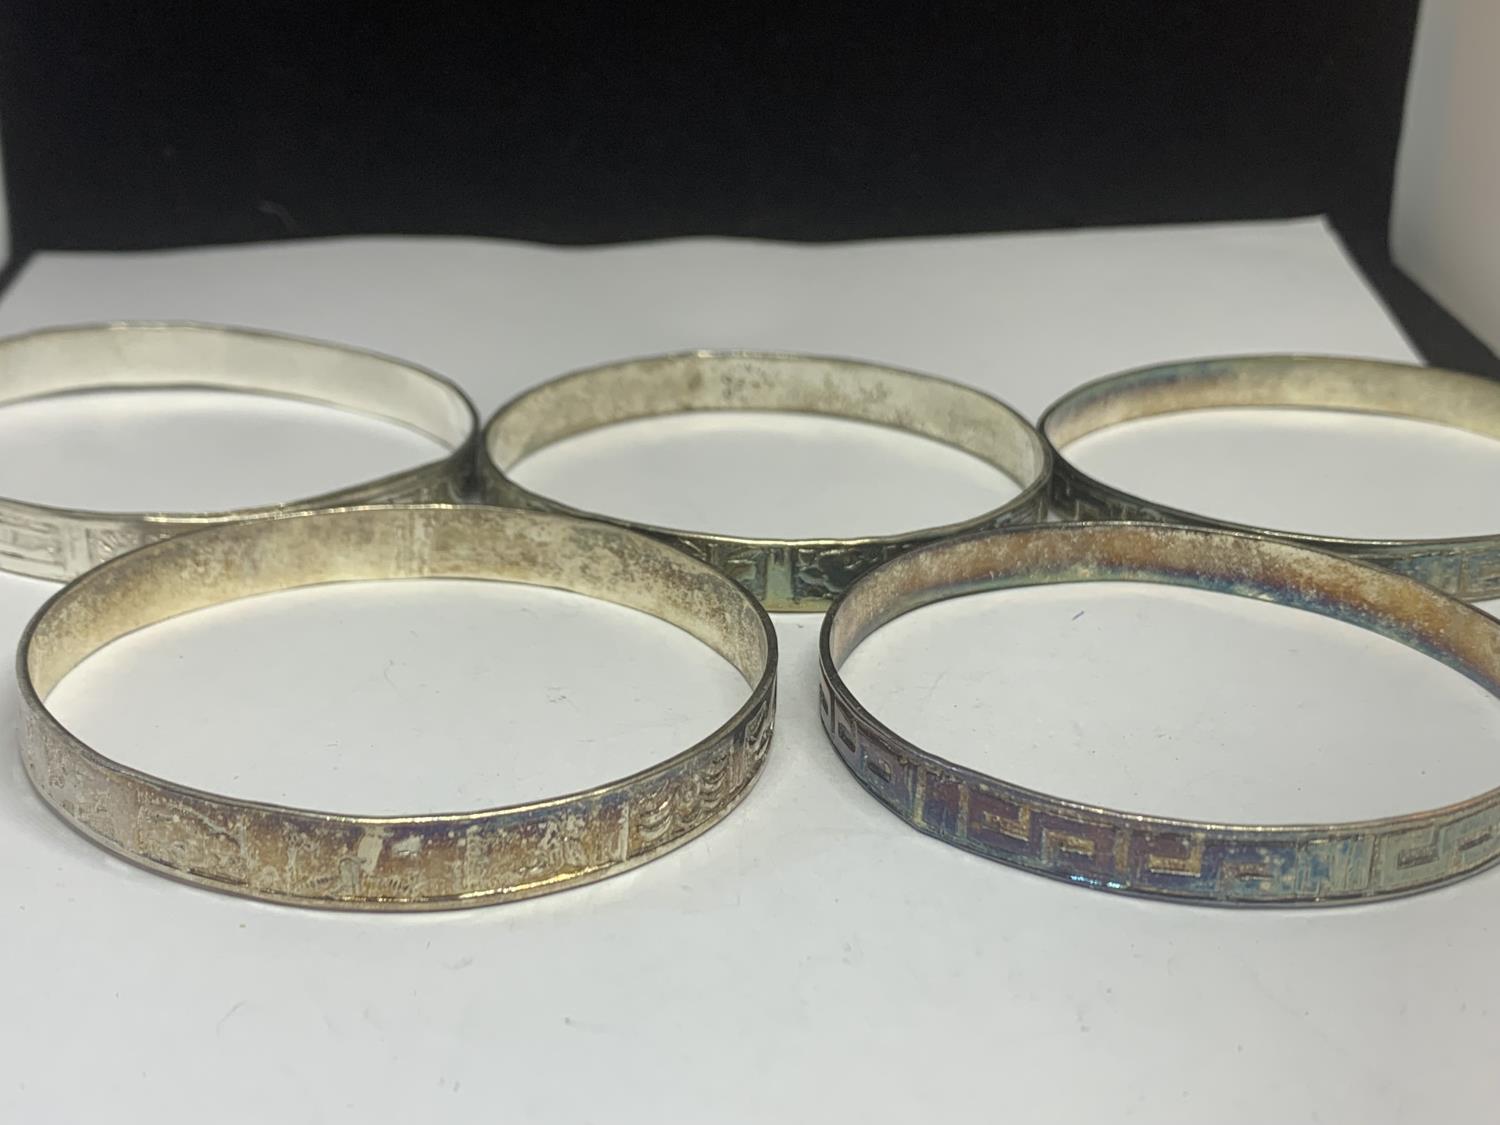 FIVE SILVER BANGLES WITH VARIOUS DESIGNS - Image 2 of 2